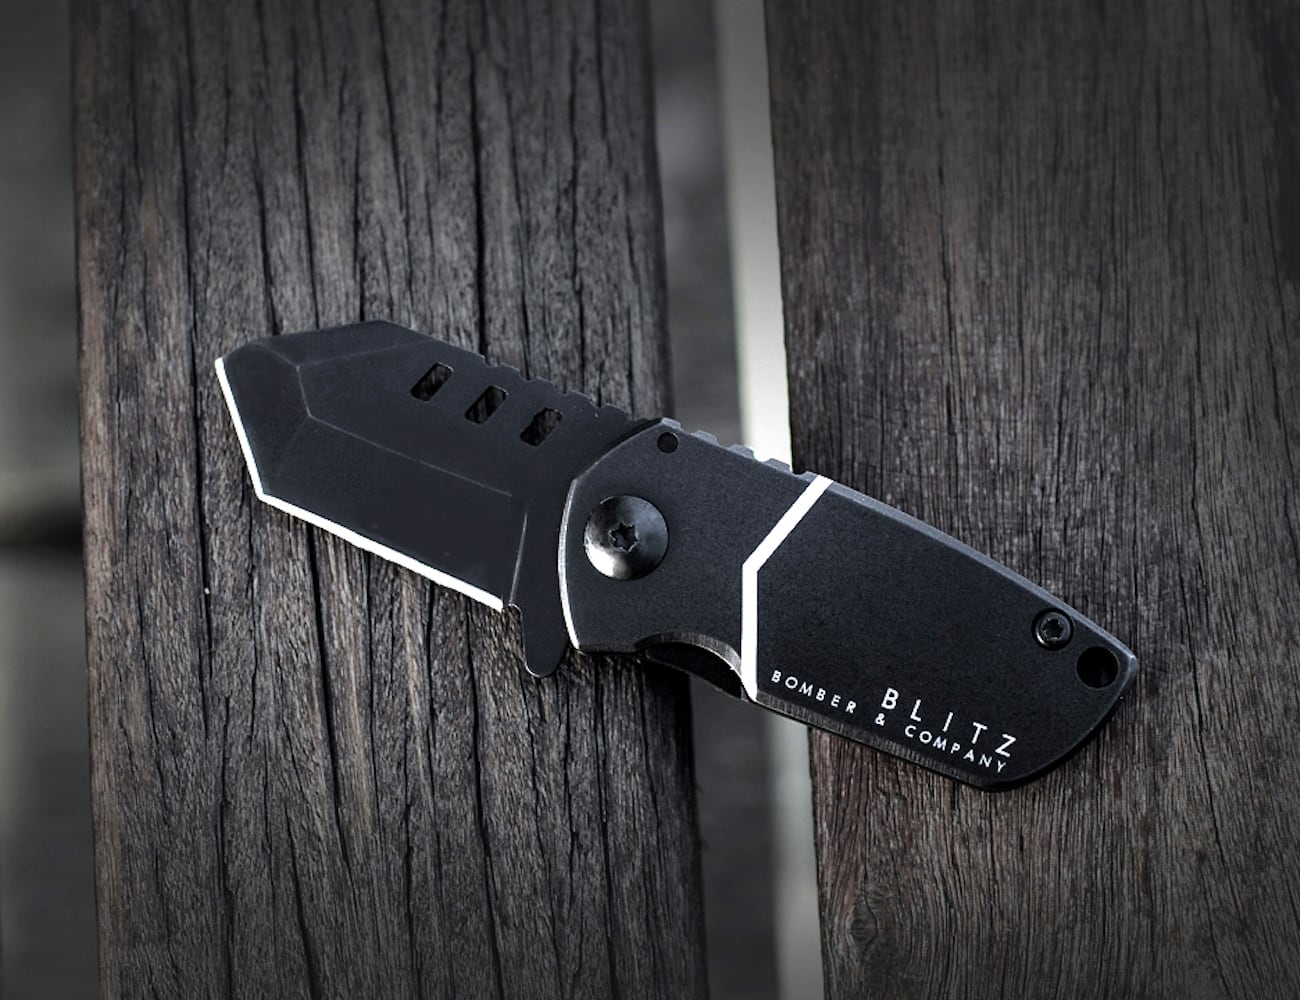 BLITZ TANTO Mini Tactical Pocket Knife is loaded with convenience